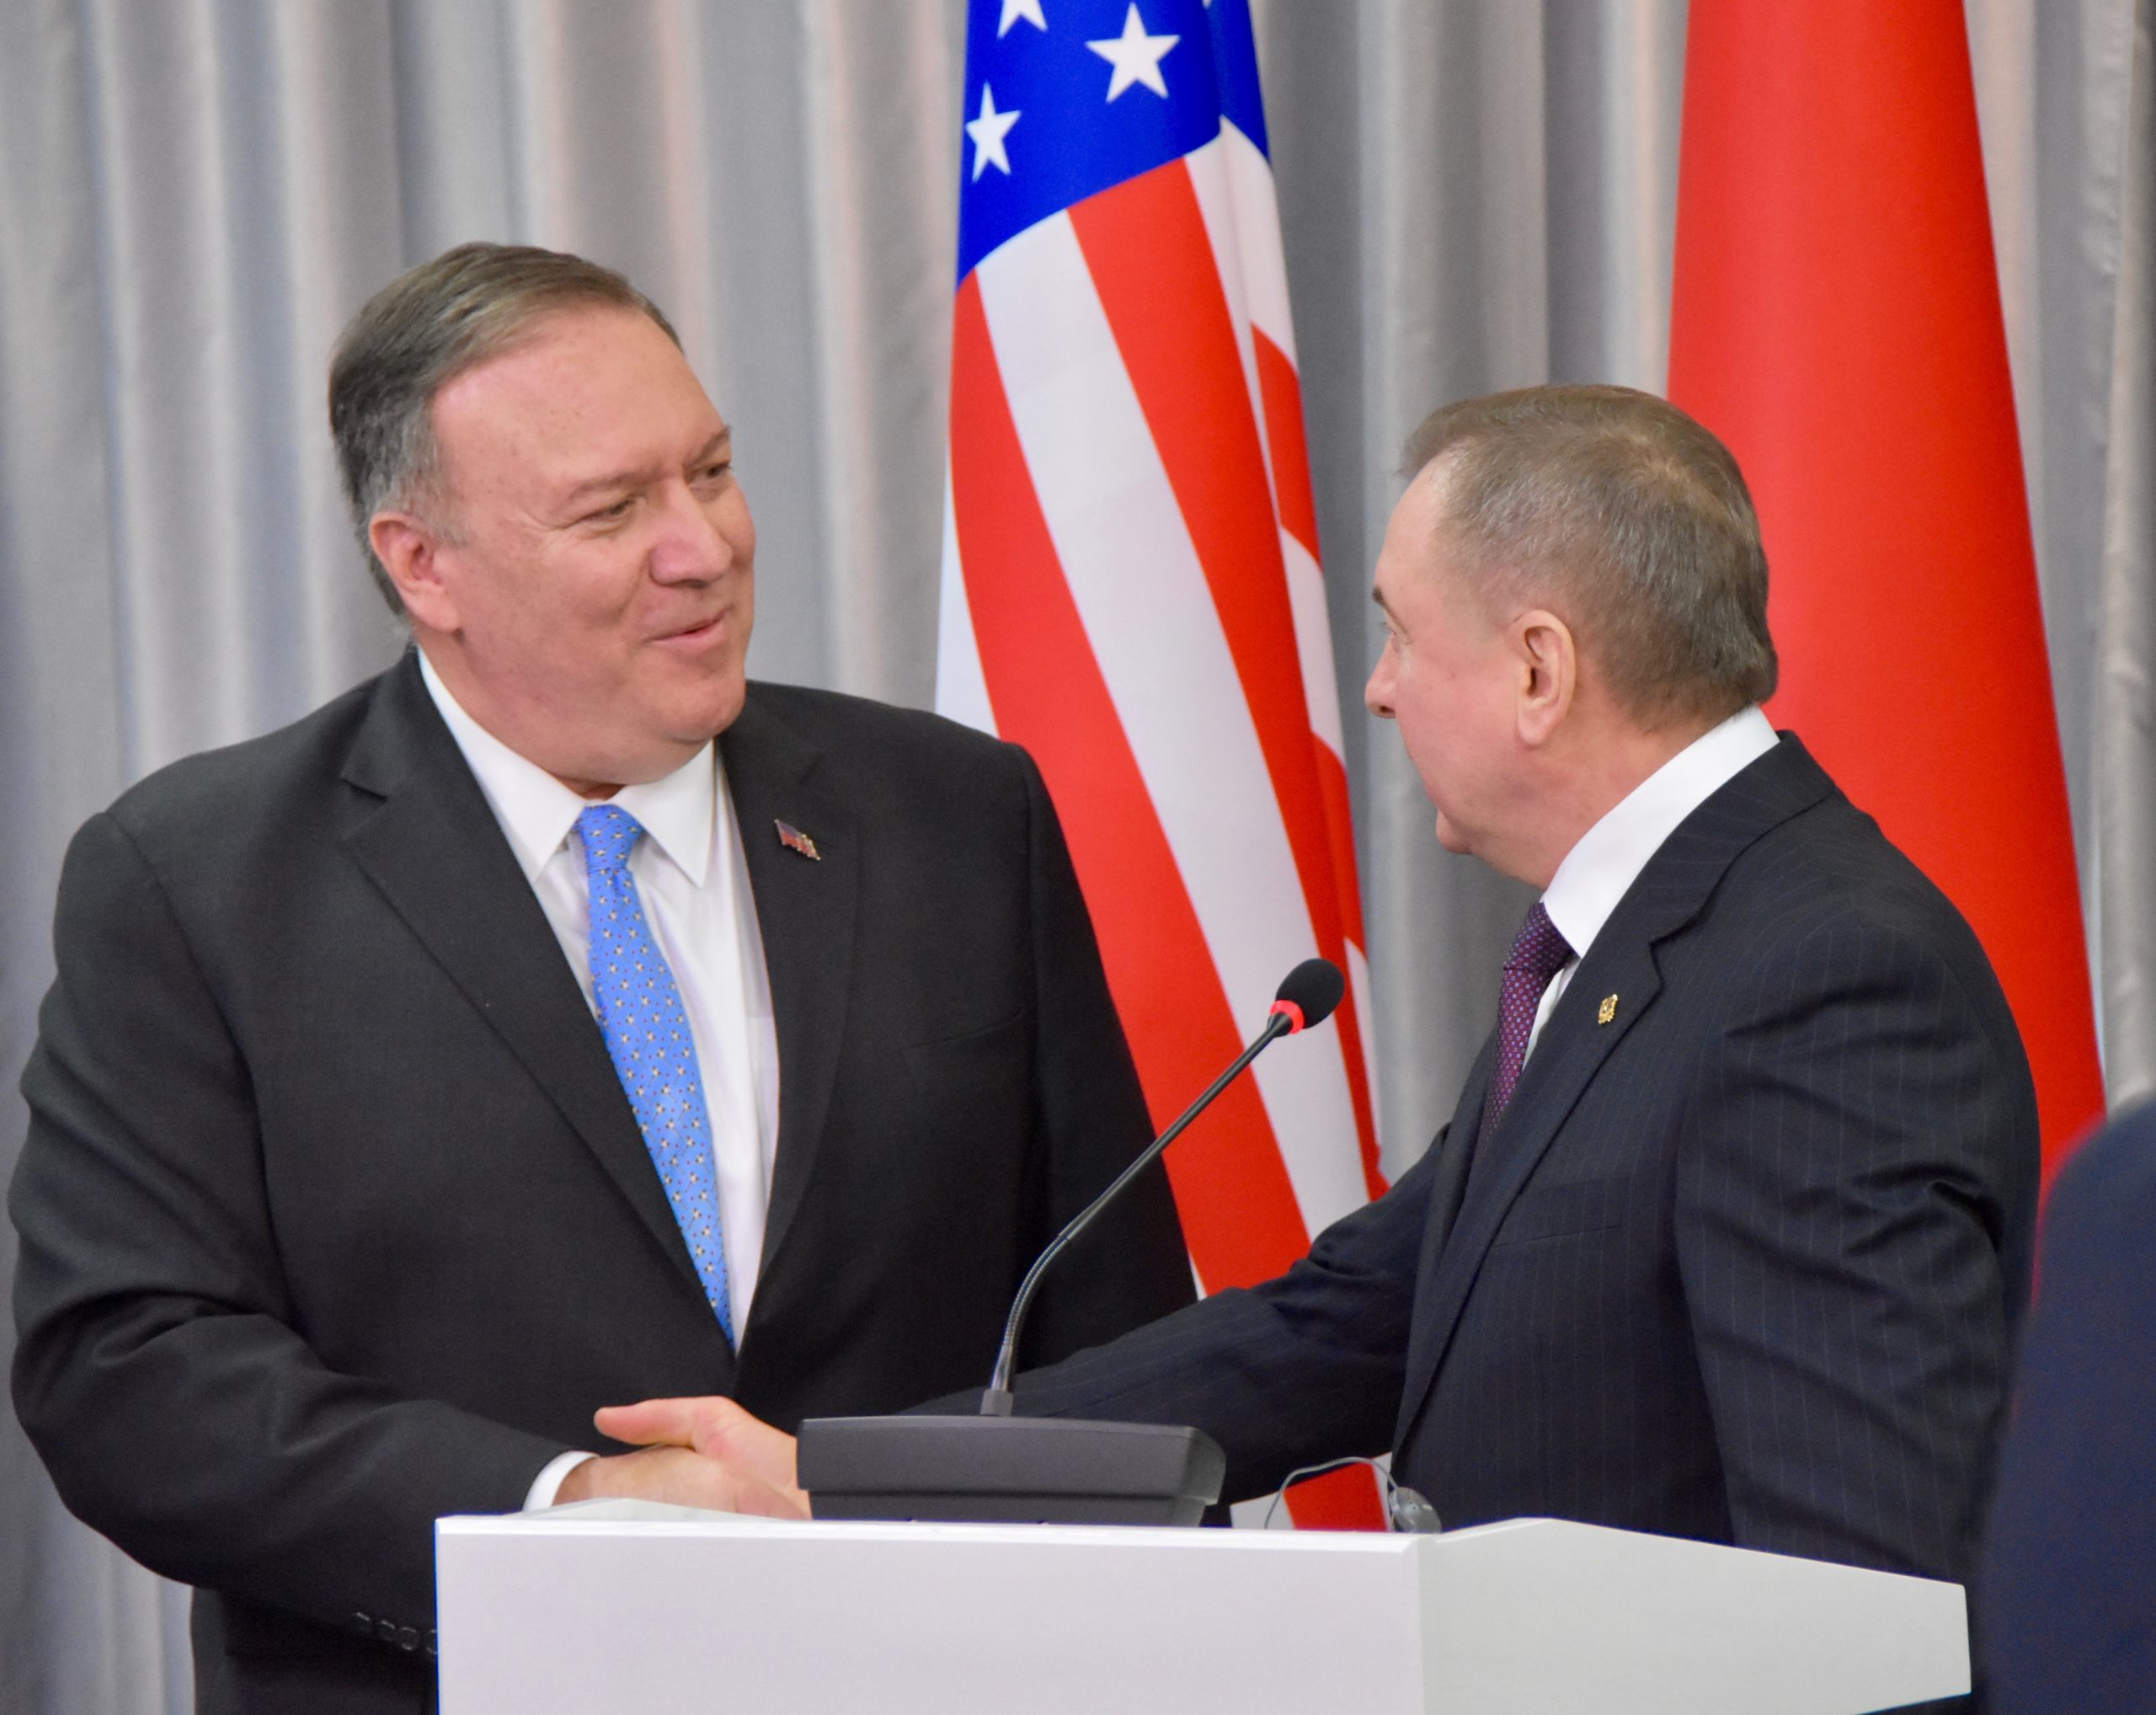 Pompeo’s visit is gaining traction